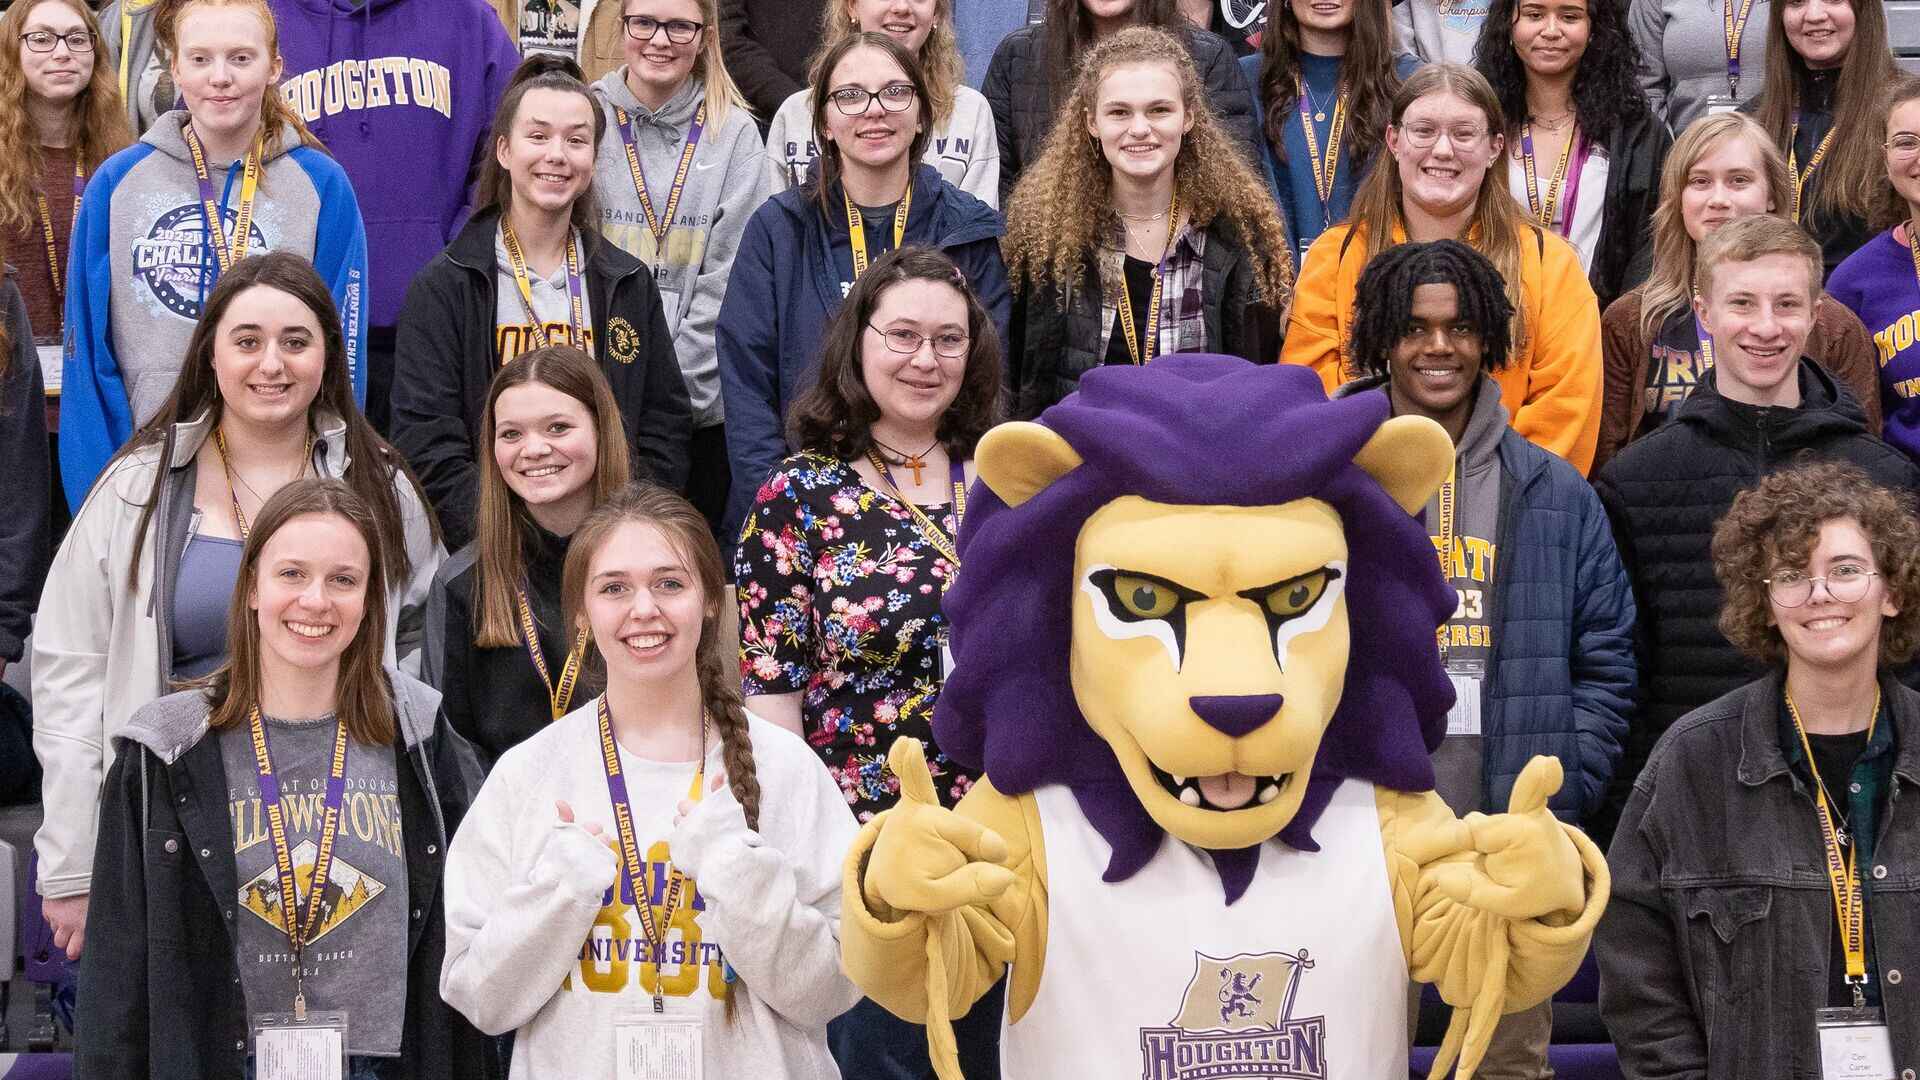 Houghton accepted students standing on bleachers with Luckey mascot during Accepted Student Day.